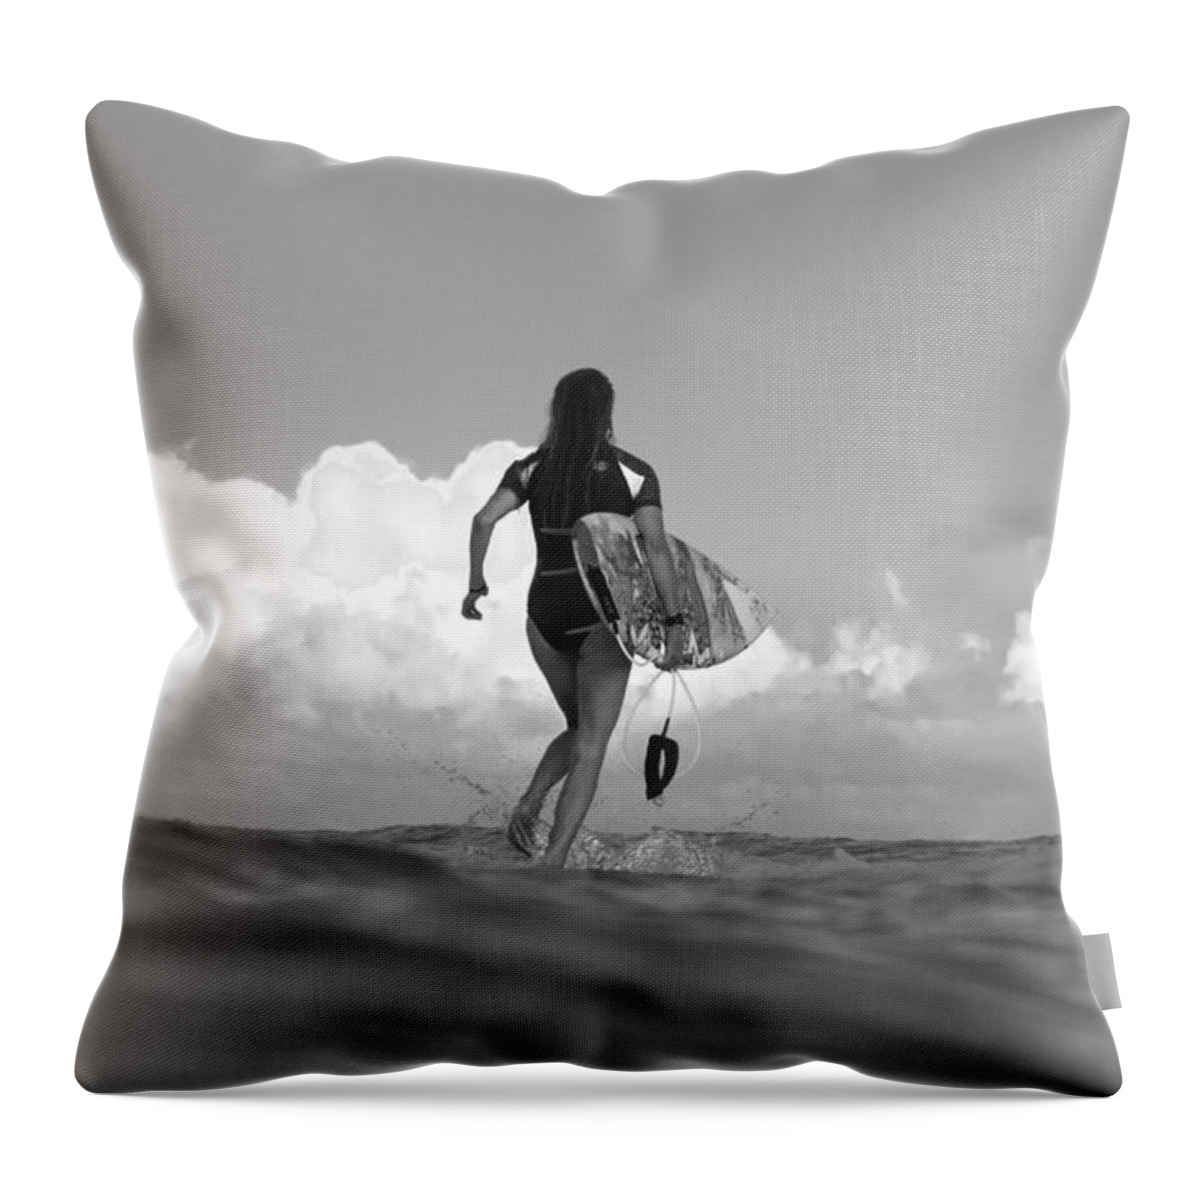 Black And White Throw Pillow featuring the photograph Walk On Water by Sean Davey